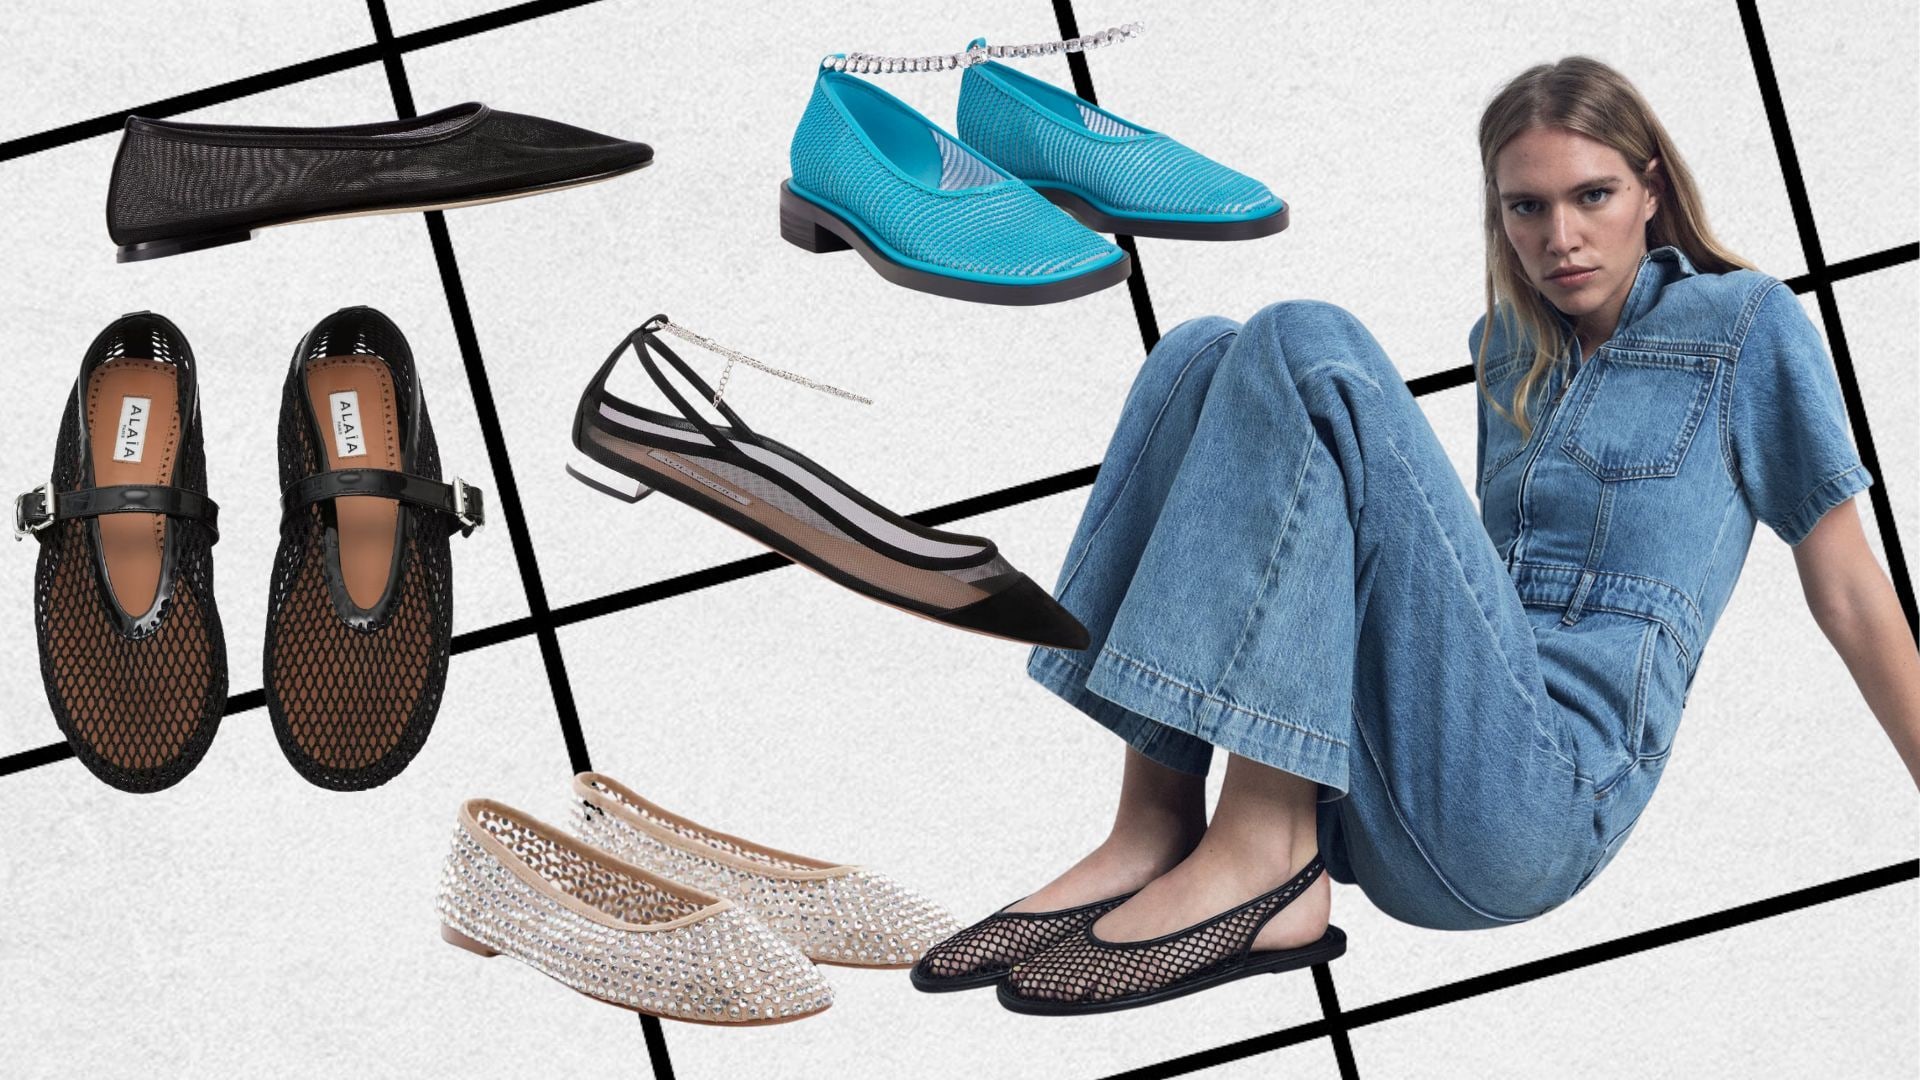 Are Ballet Flats Bad for Your Feet? Podiatrists Weigh in On This Comfy Shoe